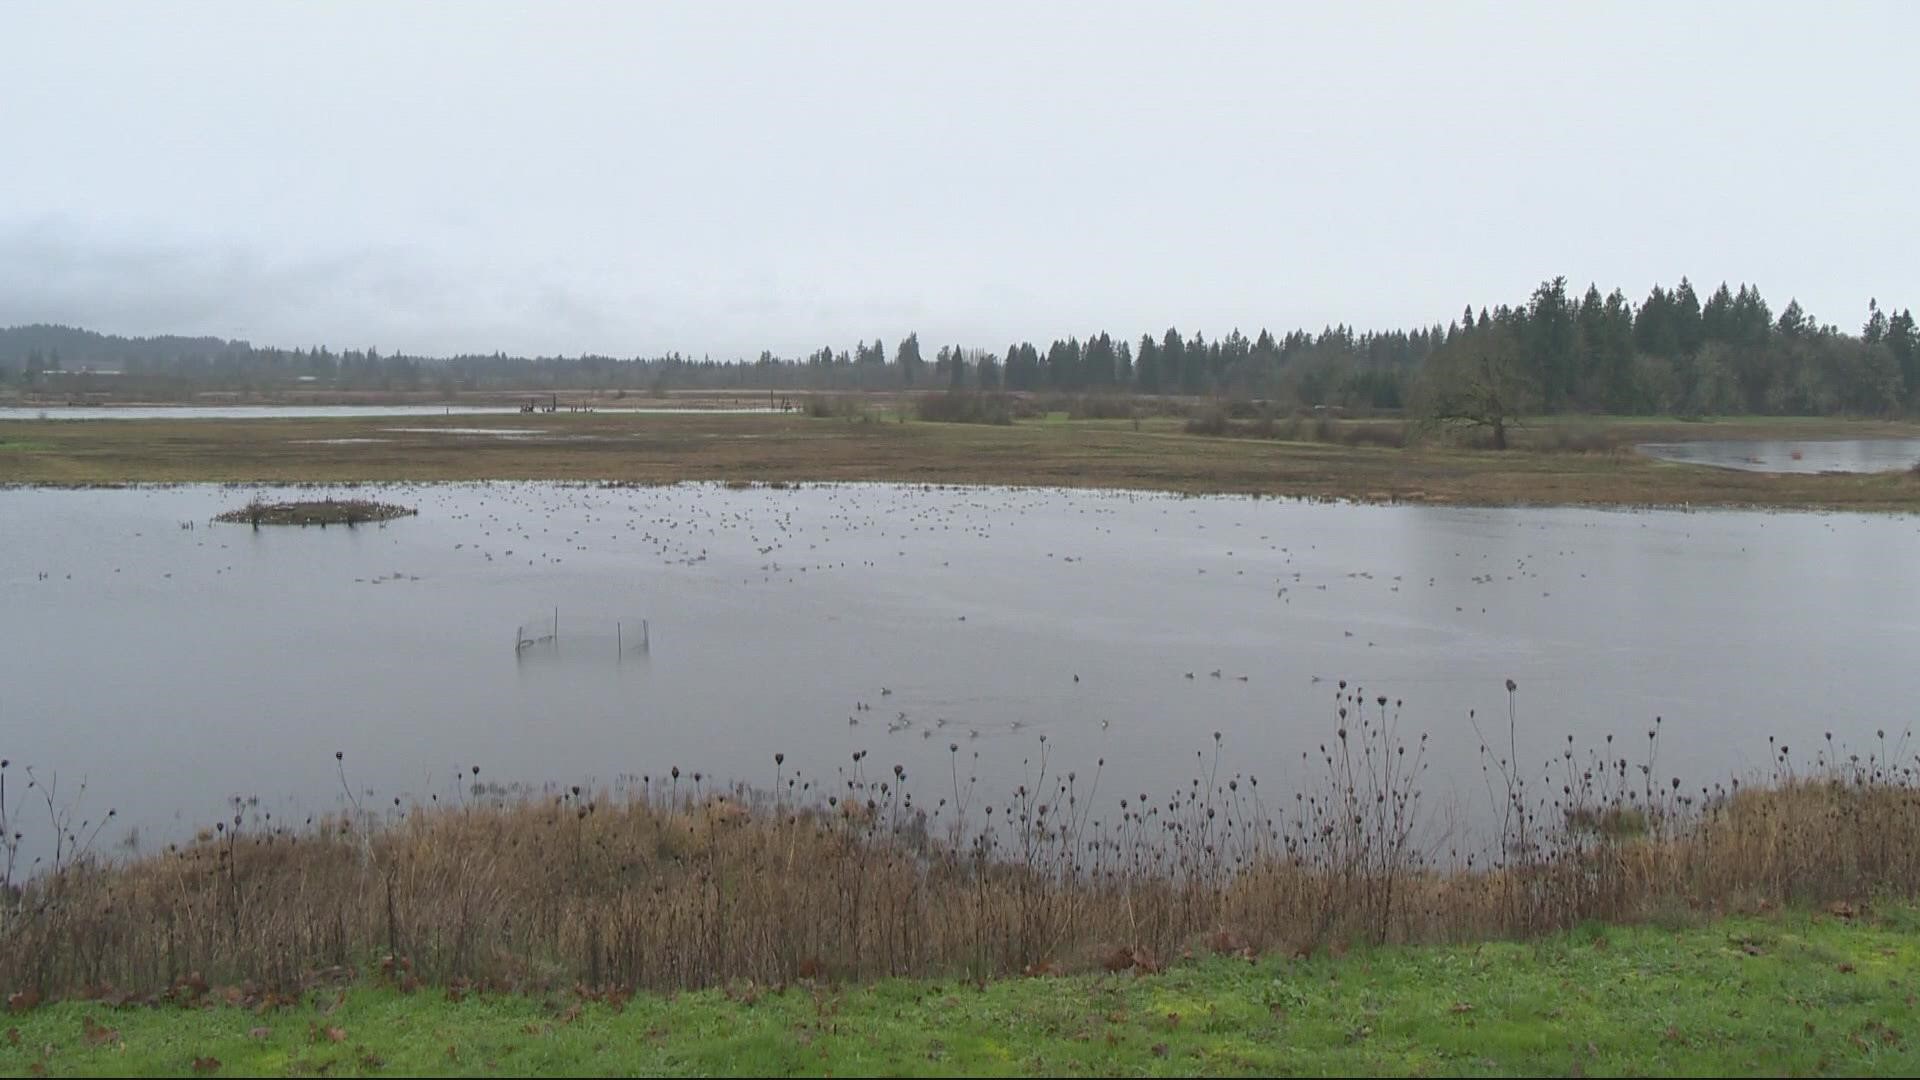 The Tualatin River National Wildlife Refuge is not far from downtown Portland. With more typical PNW winter weather on the way, these refuges are a great option.